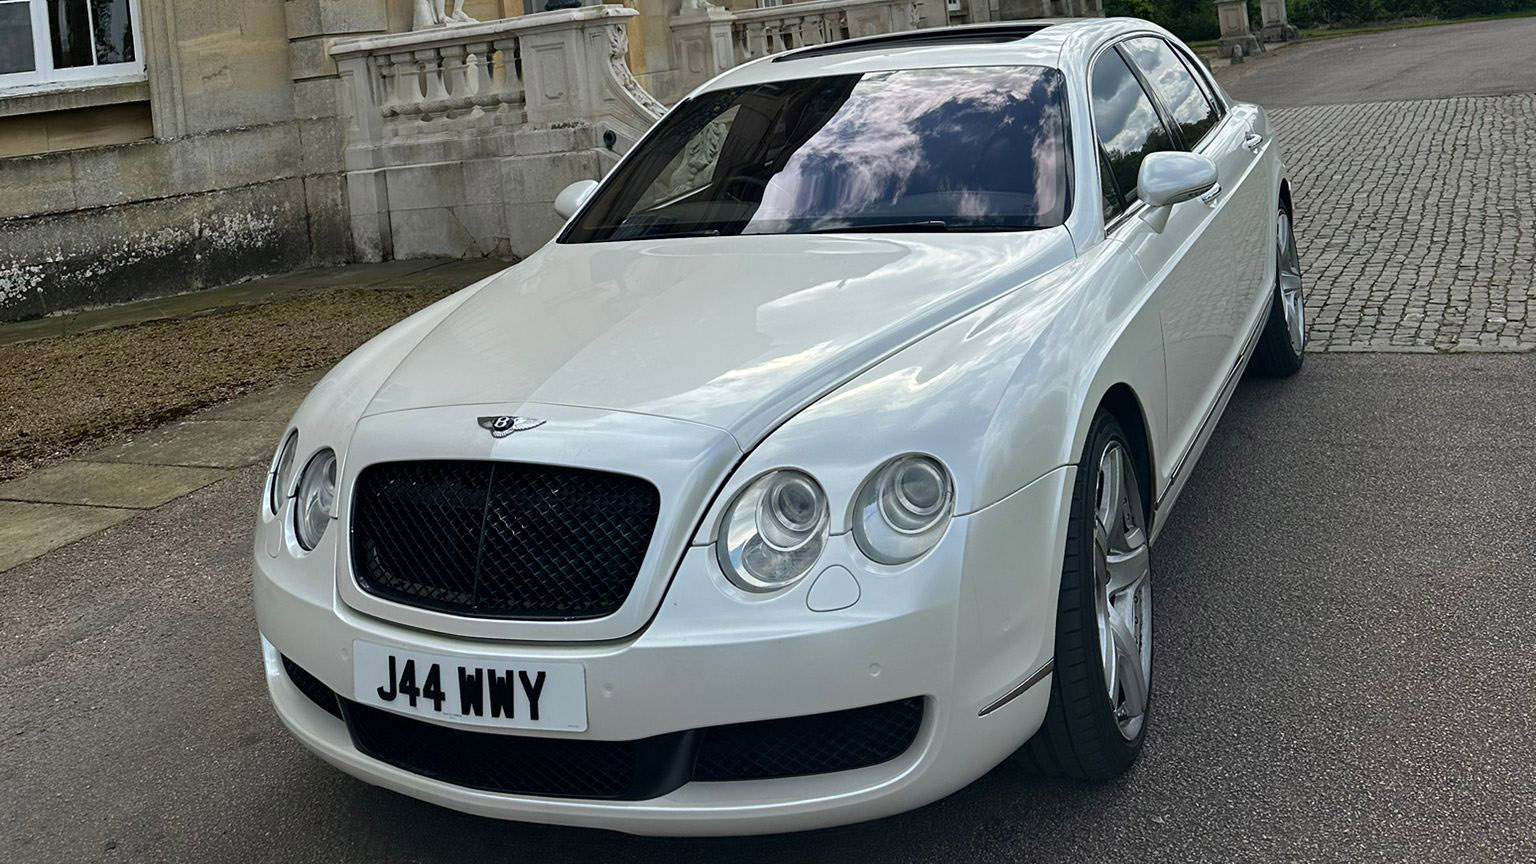 Front view of a Modern White Bentley with large Front Grill in Black in front ot a brick wall